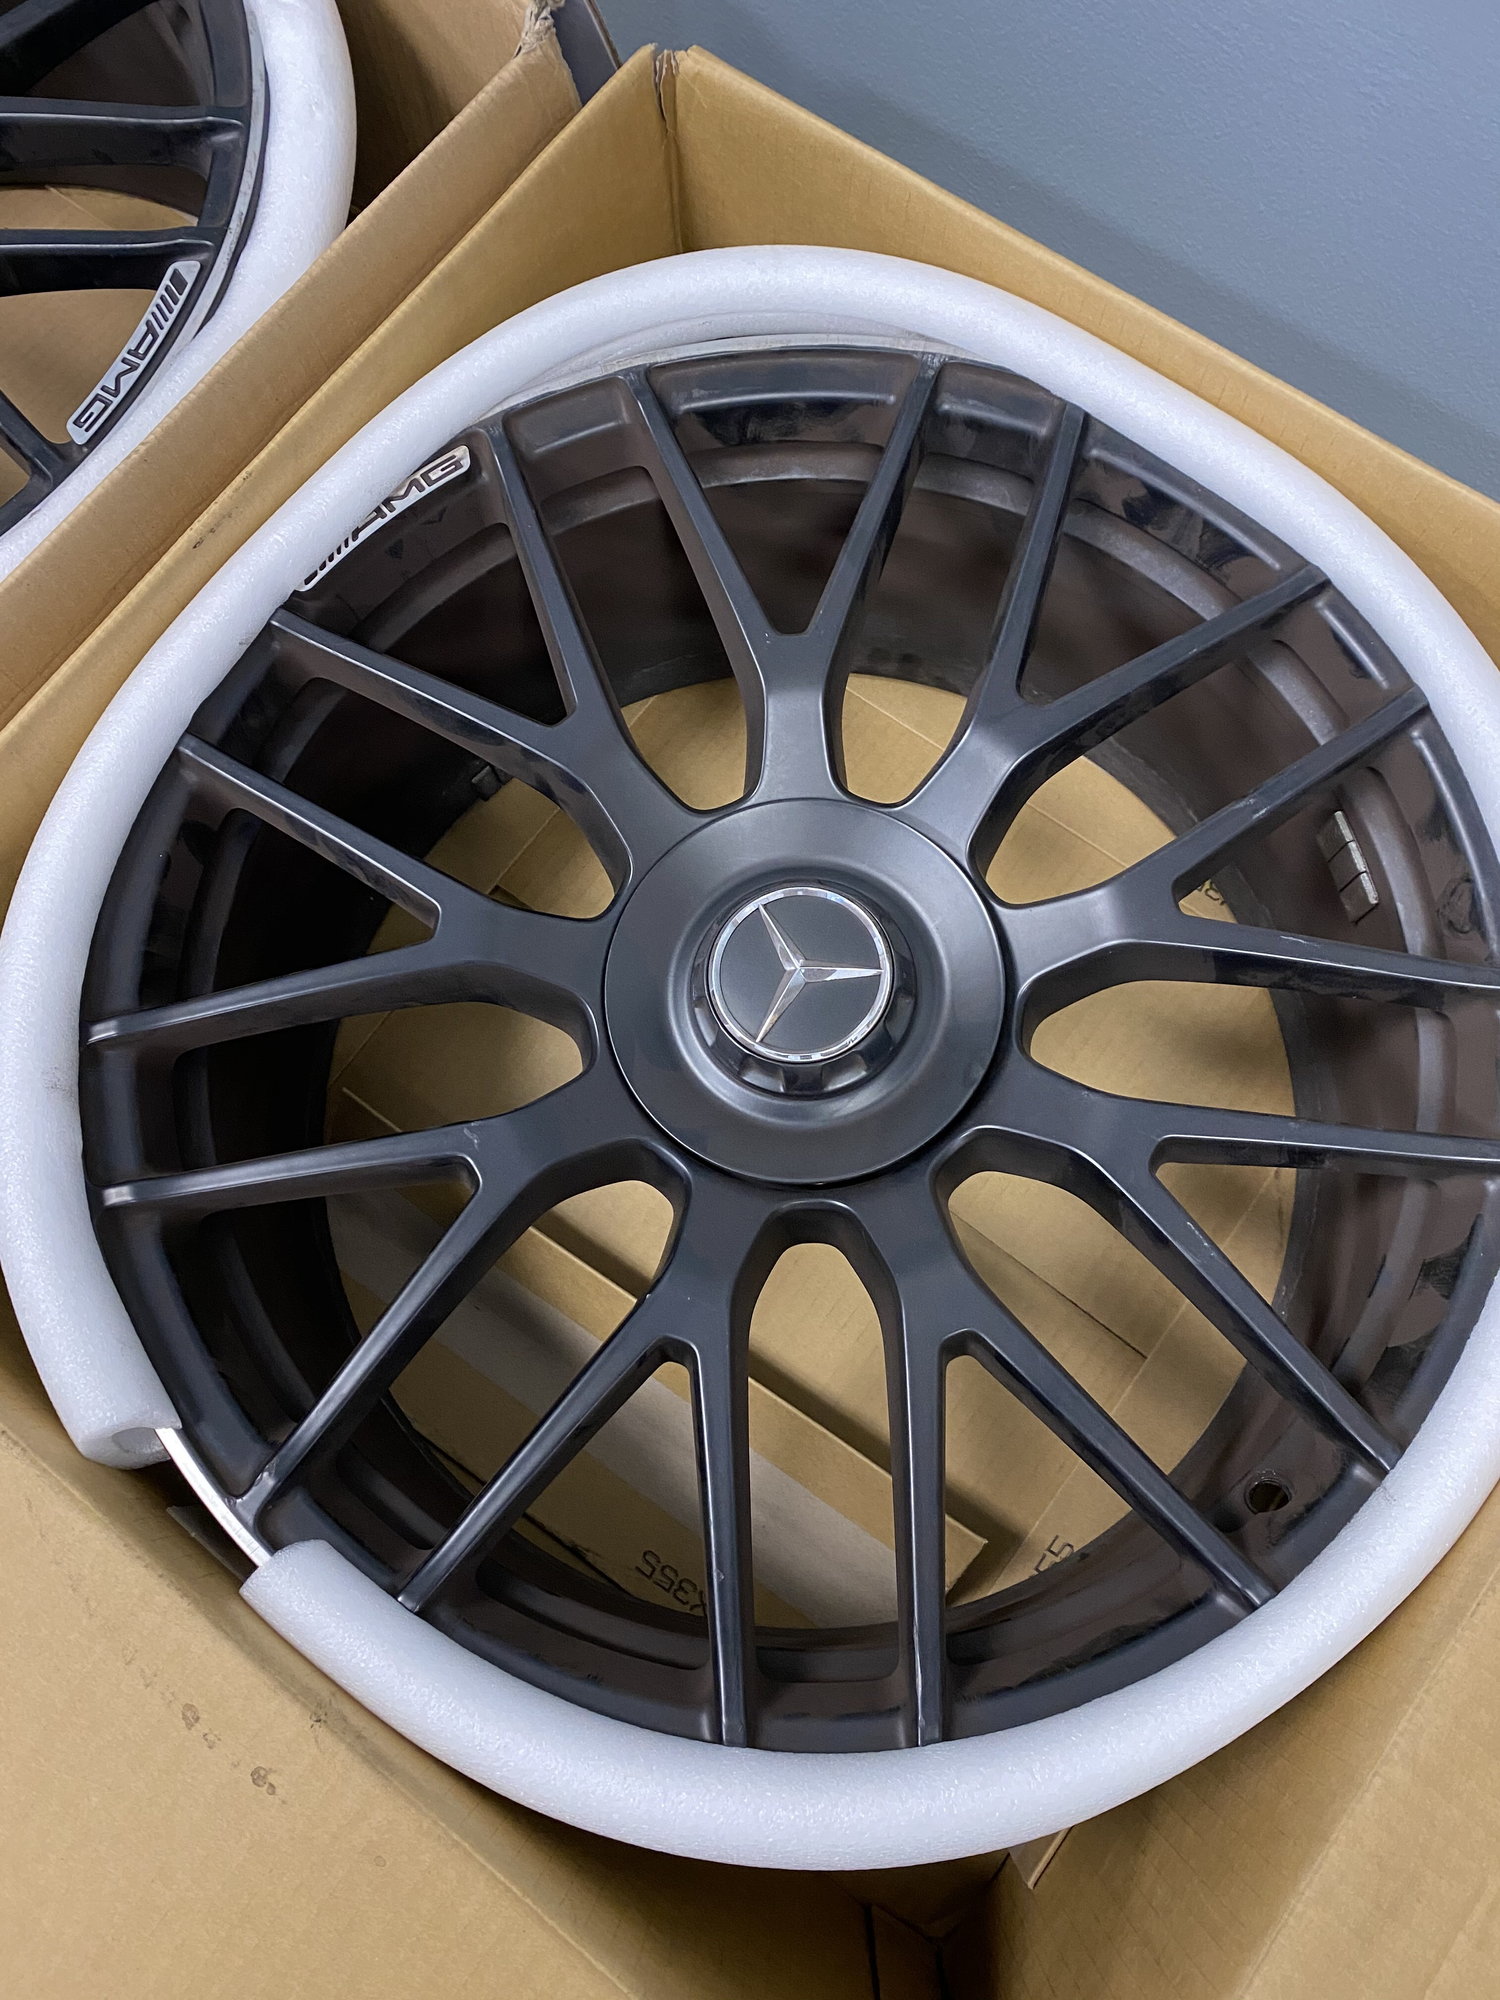 Wheels and Tires/Axles - 19" C63s MERCEDES OEM AMG Factory C63 Rims (Set of 4) staggered - Used - All Years Mercedes-Benz C63 AMG - Irvine, CA 92618, United States